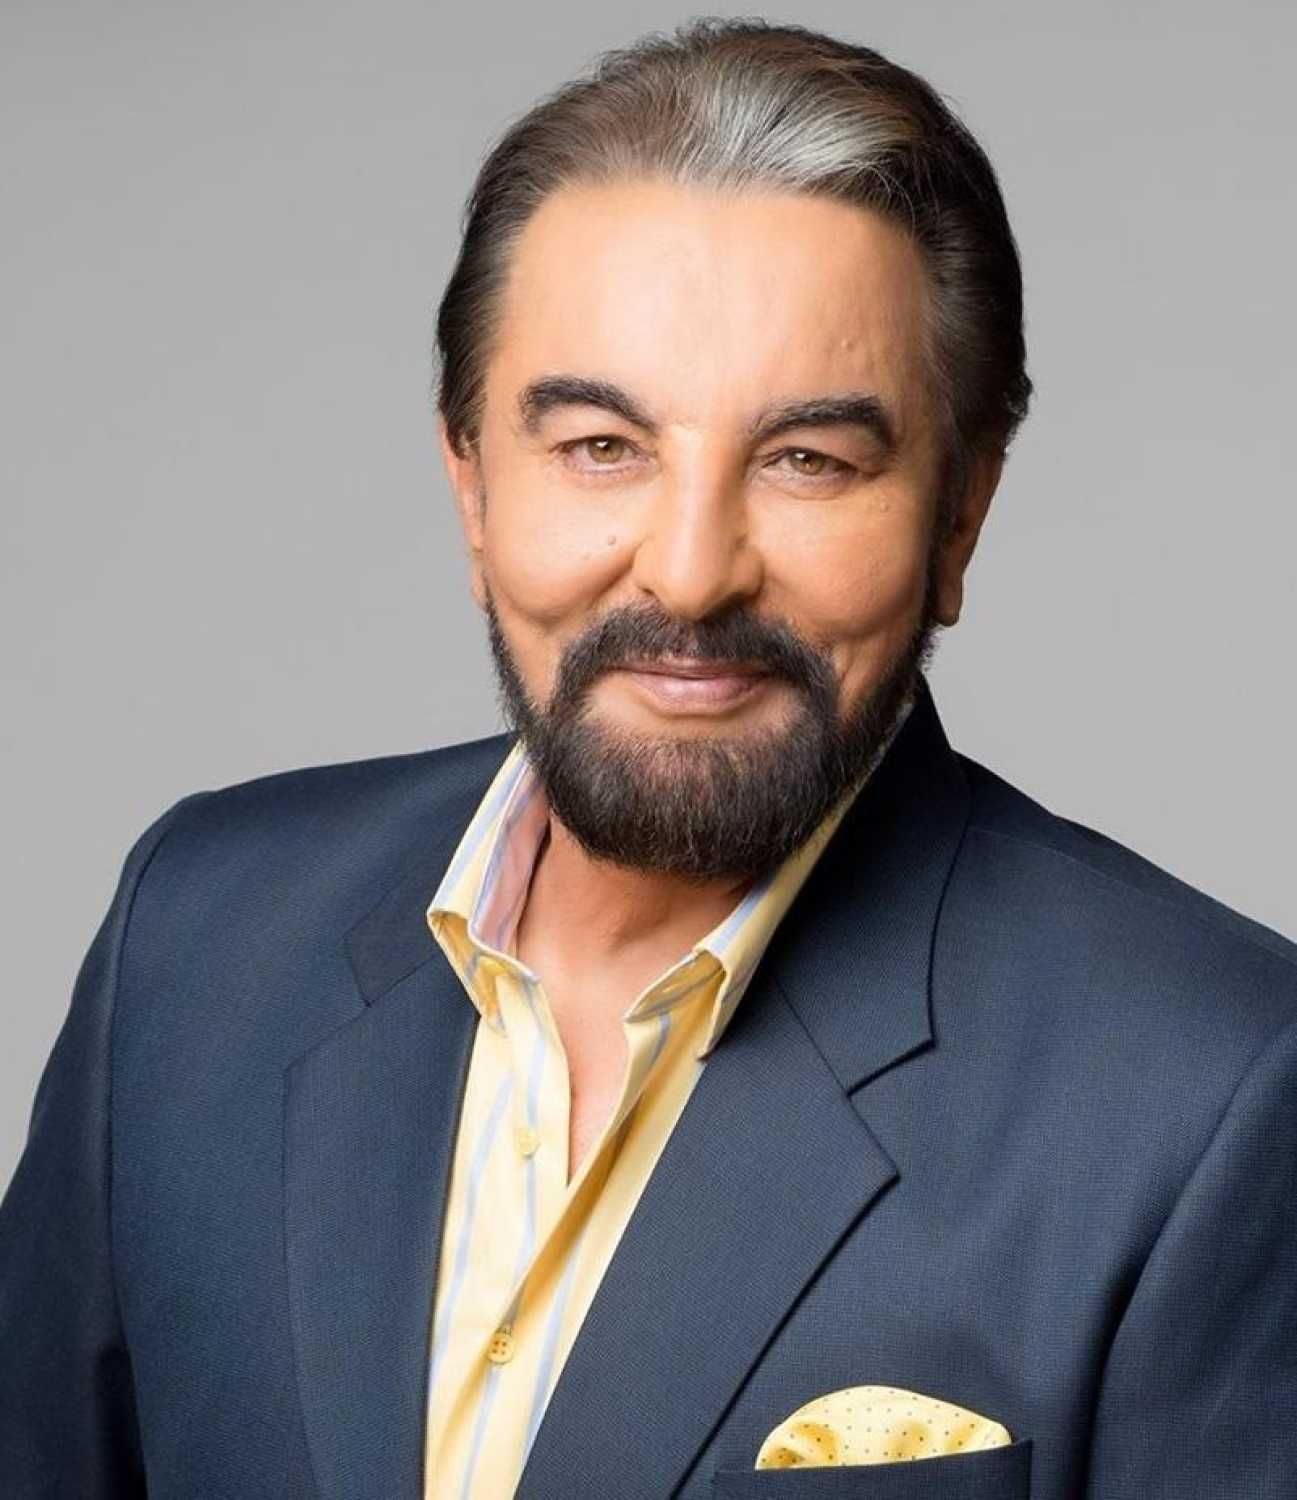 Kabir Bedi On Son Siddharth’s Death: “It’s A Battle I Lost Because He Chose To Go; The Guilt Is Enormous”